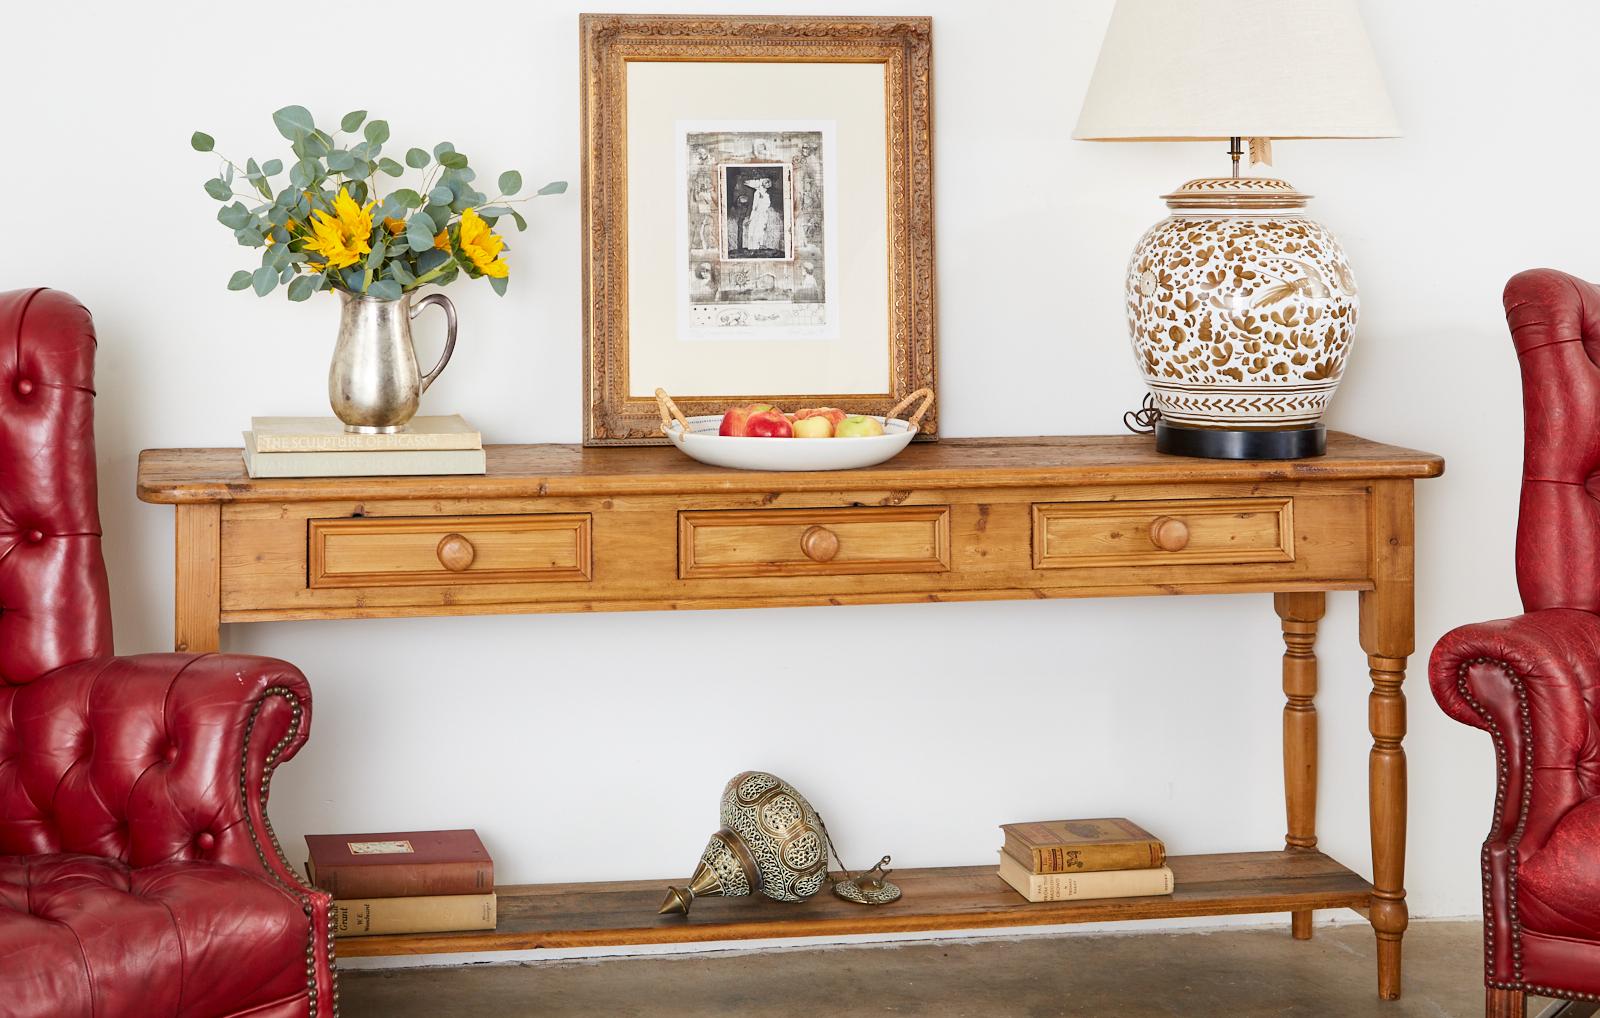 20th century rustic country American pine three-drawer console table or sofa table. Features a two-tier design with a large lower display shelf. The case is fitted with three drawers having wood knob pulls. The shelf and thick top have a beautifully